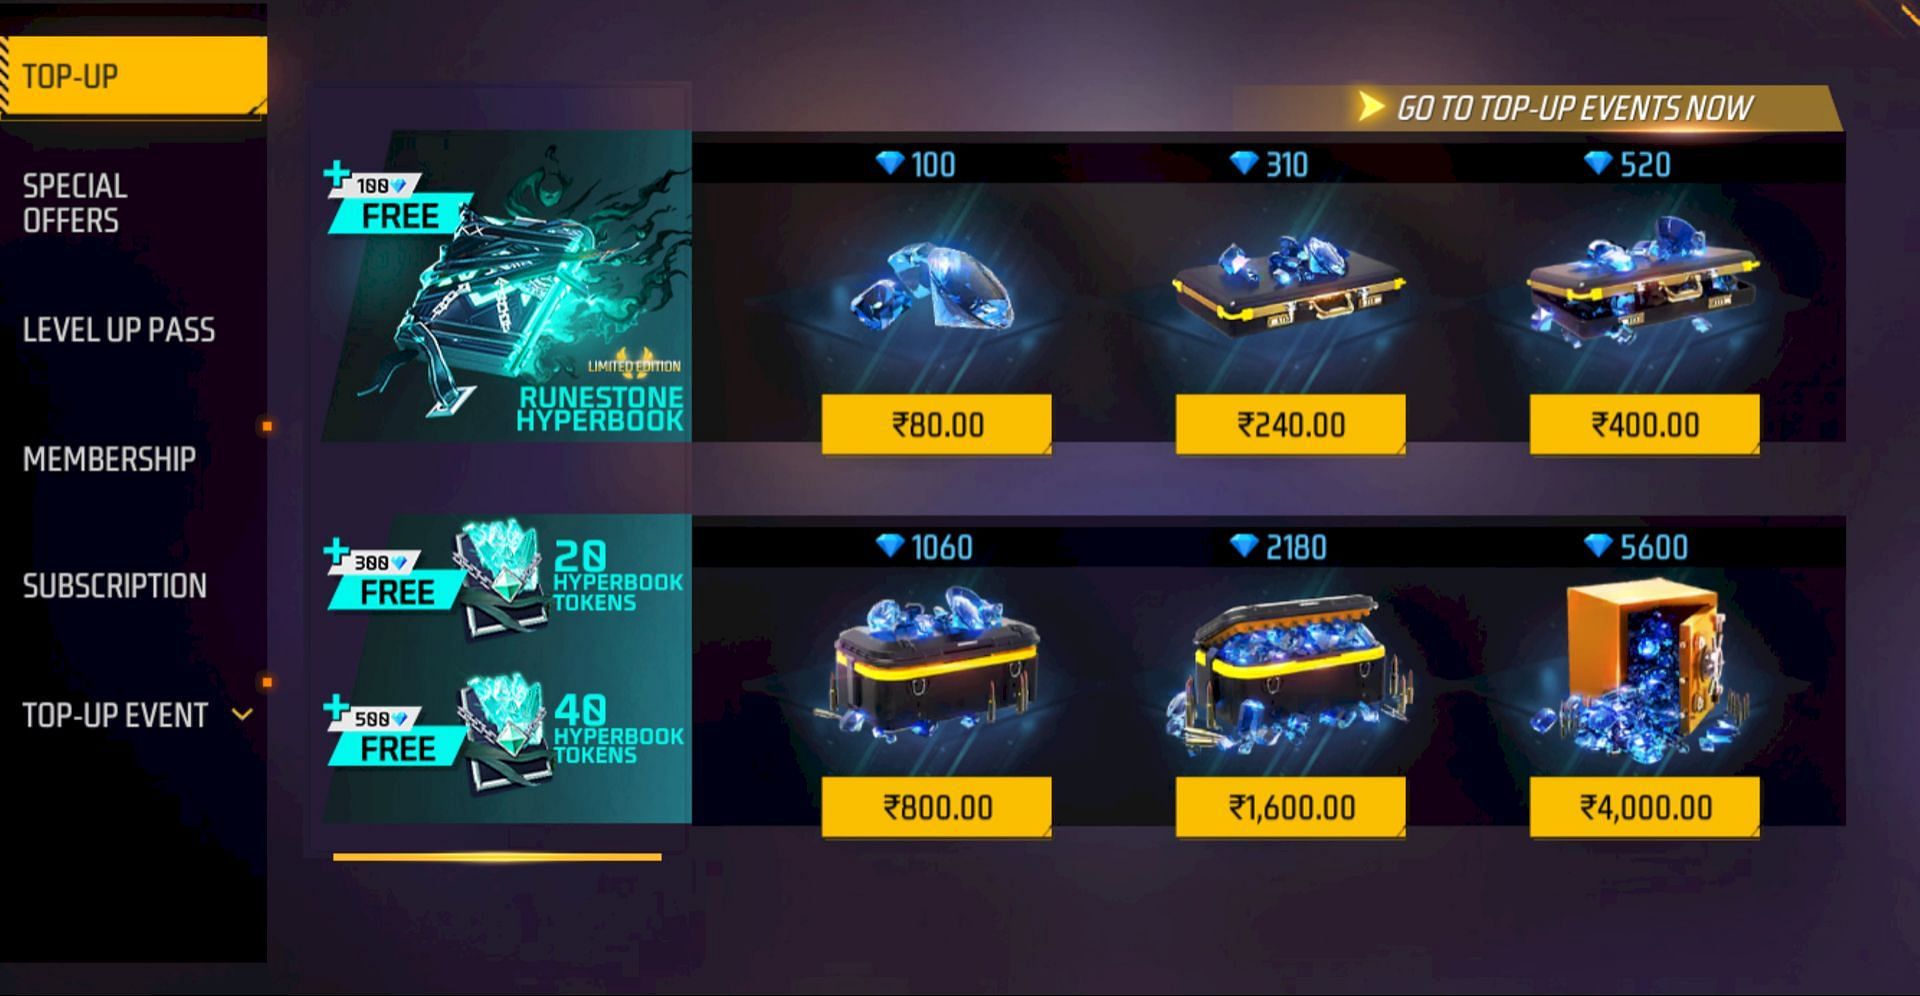 The ongoing top-up event only needs a purchase of 500 diamonds in total (Image via Garena)